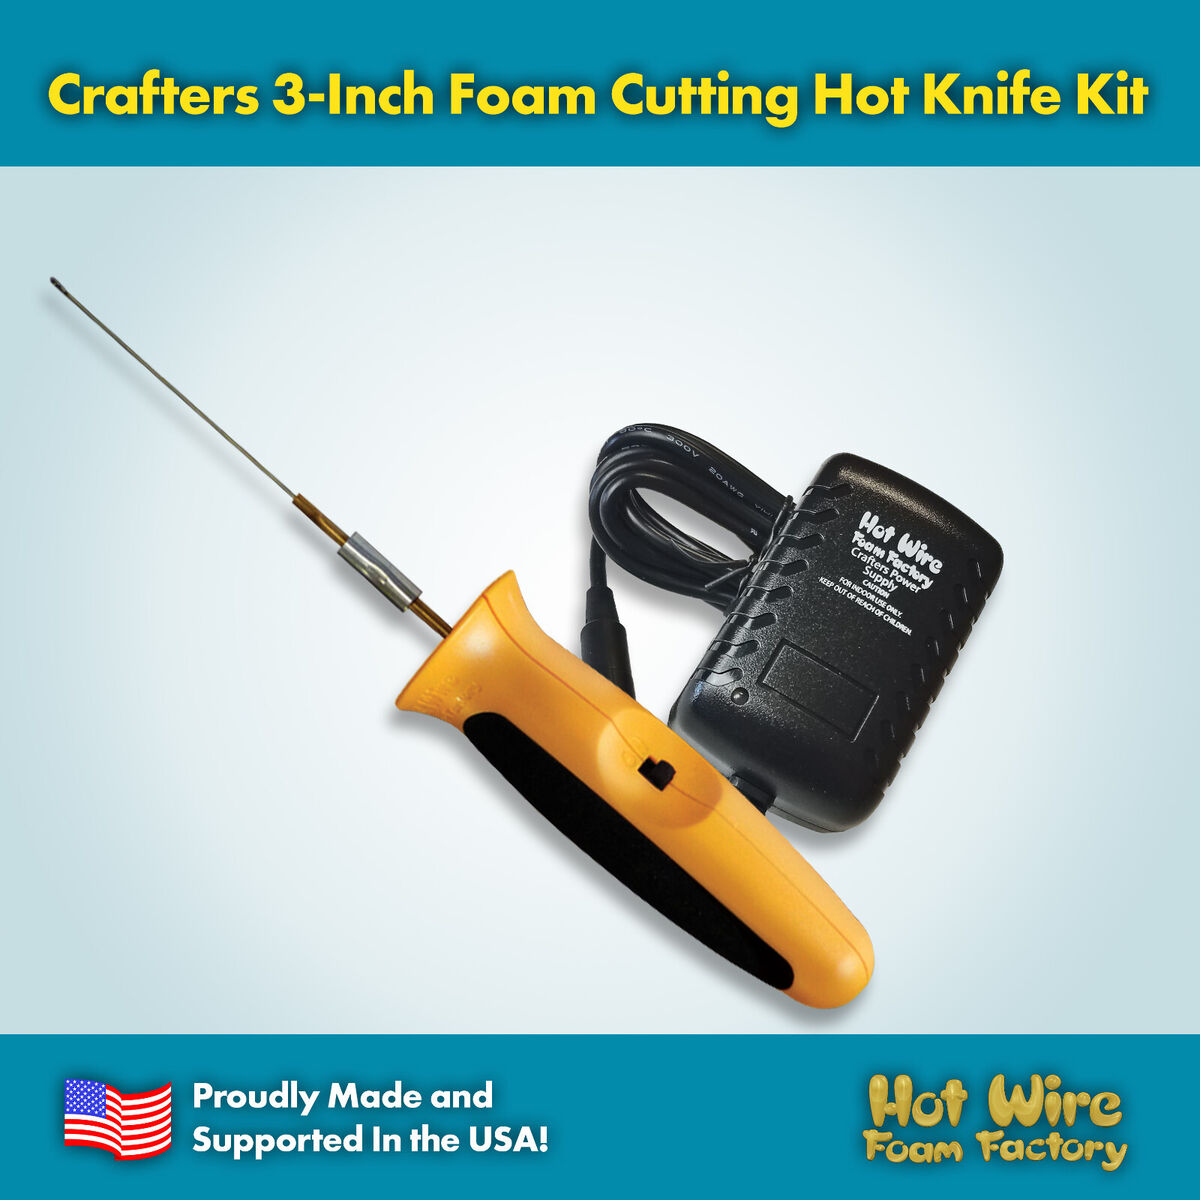 Hot Wire Foam Factory Industrial Hot Knife With 6-inch Blade